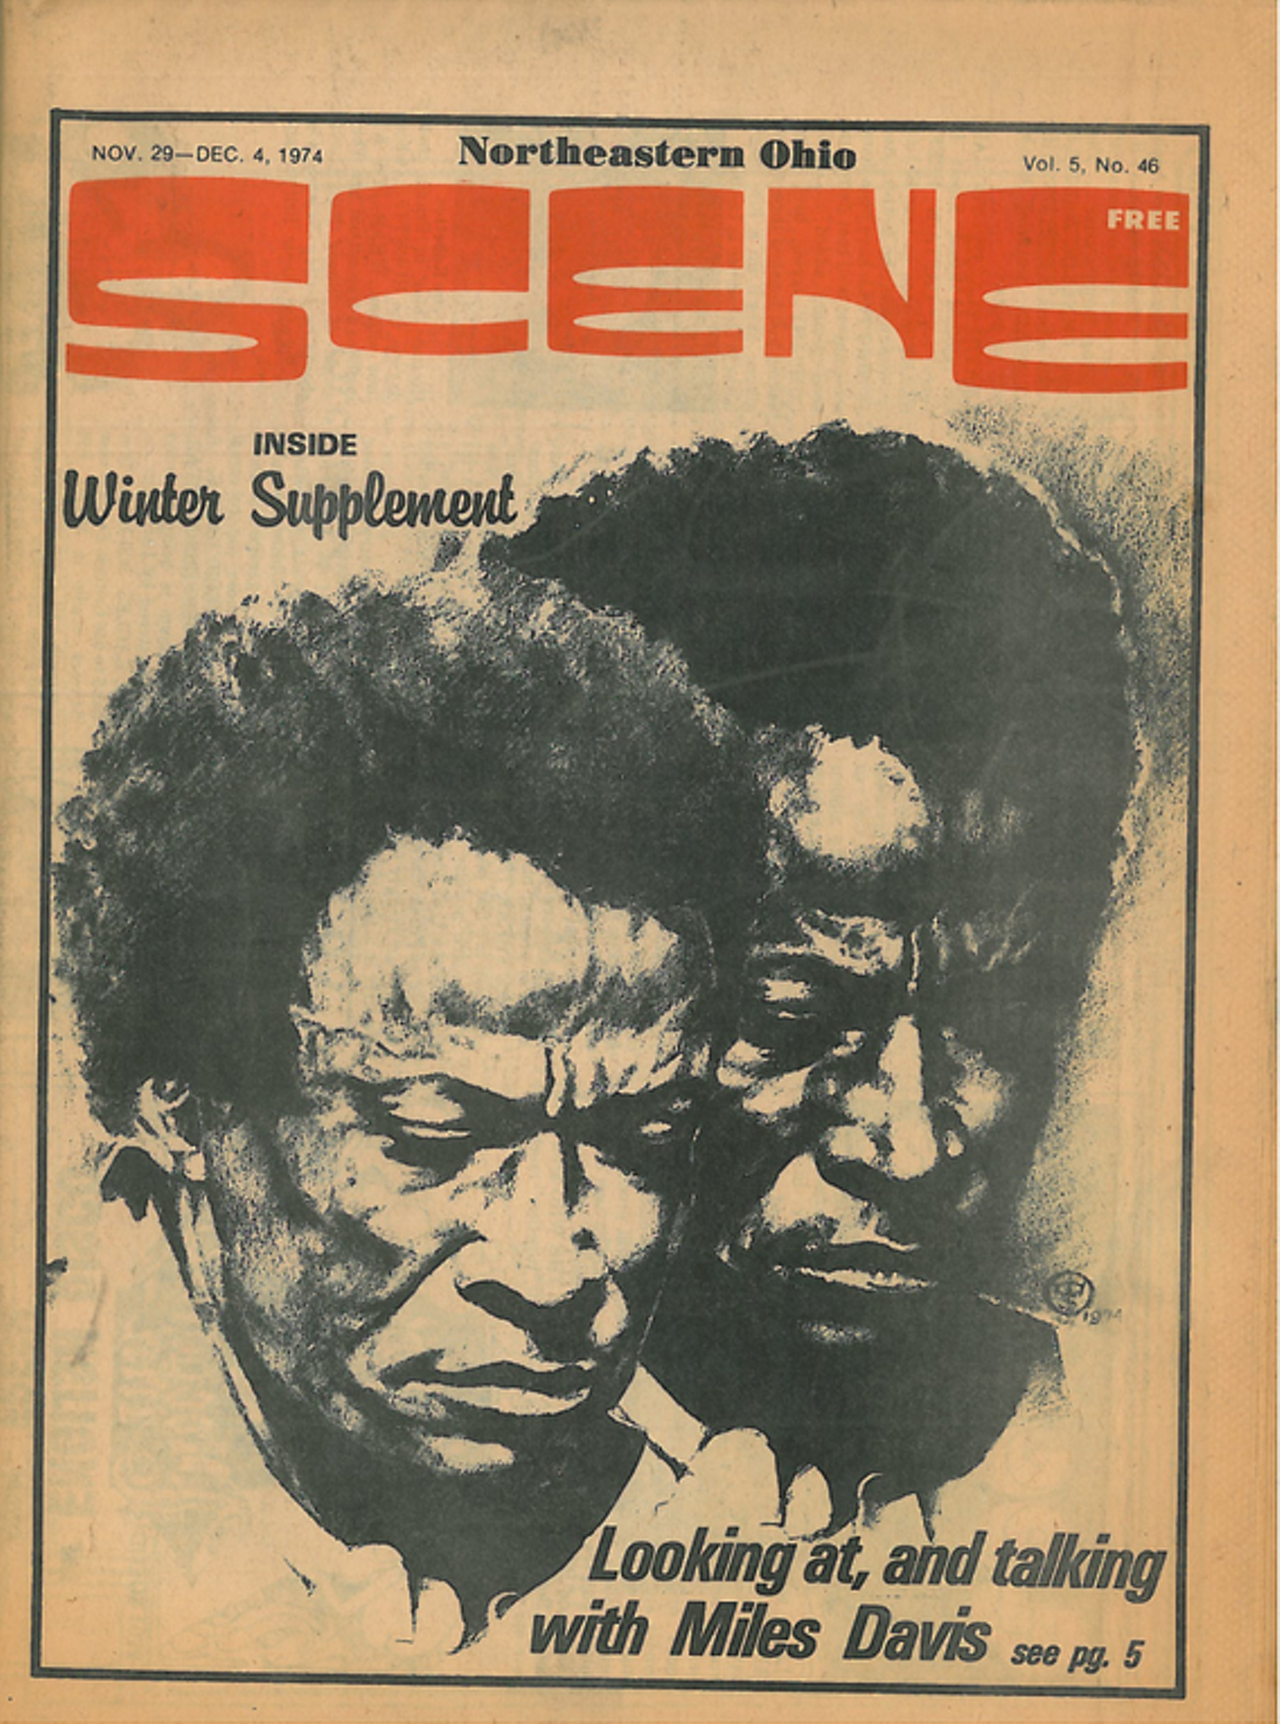 "Looking at, and talking with Miles Davis," 1974.